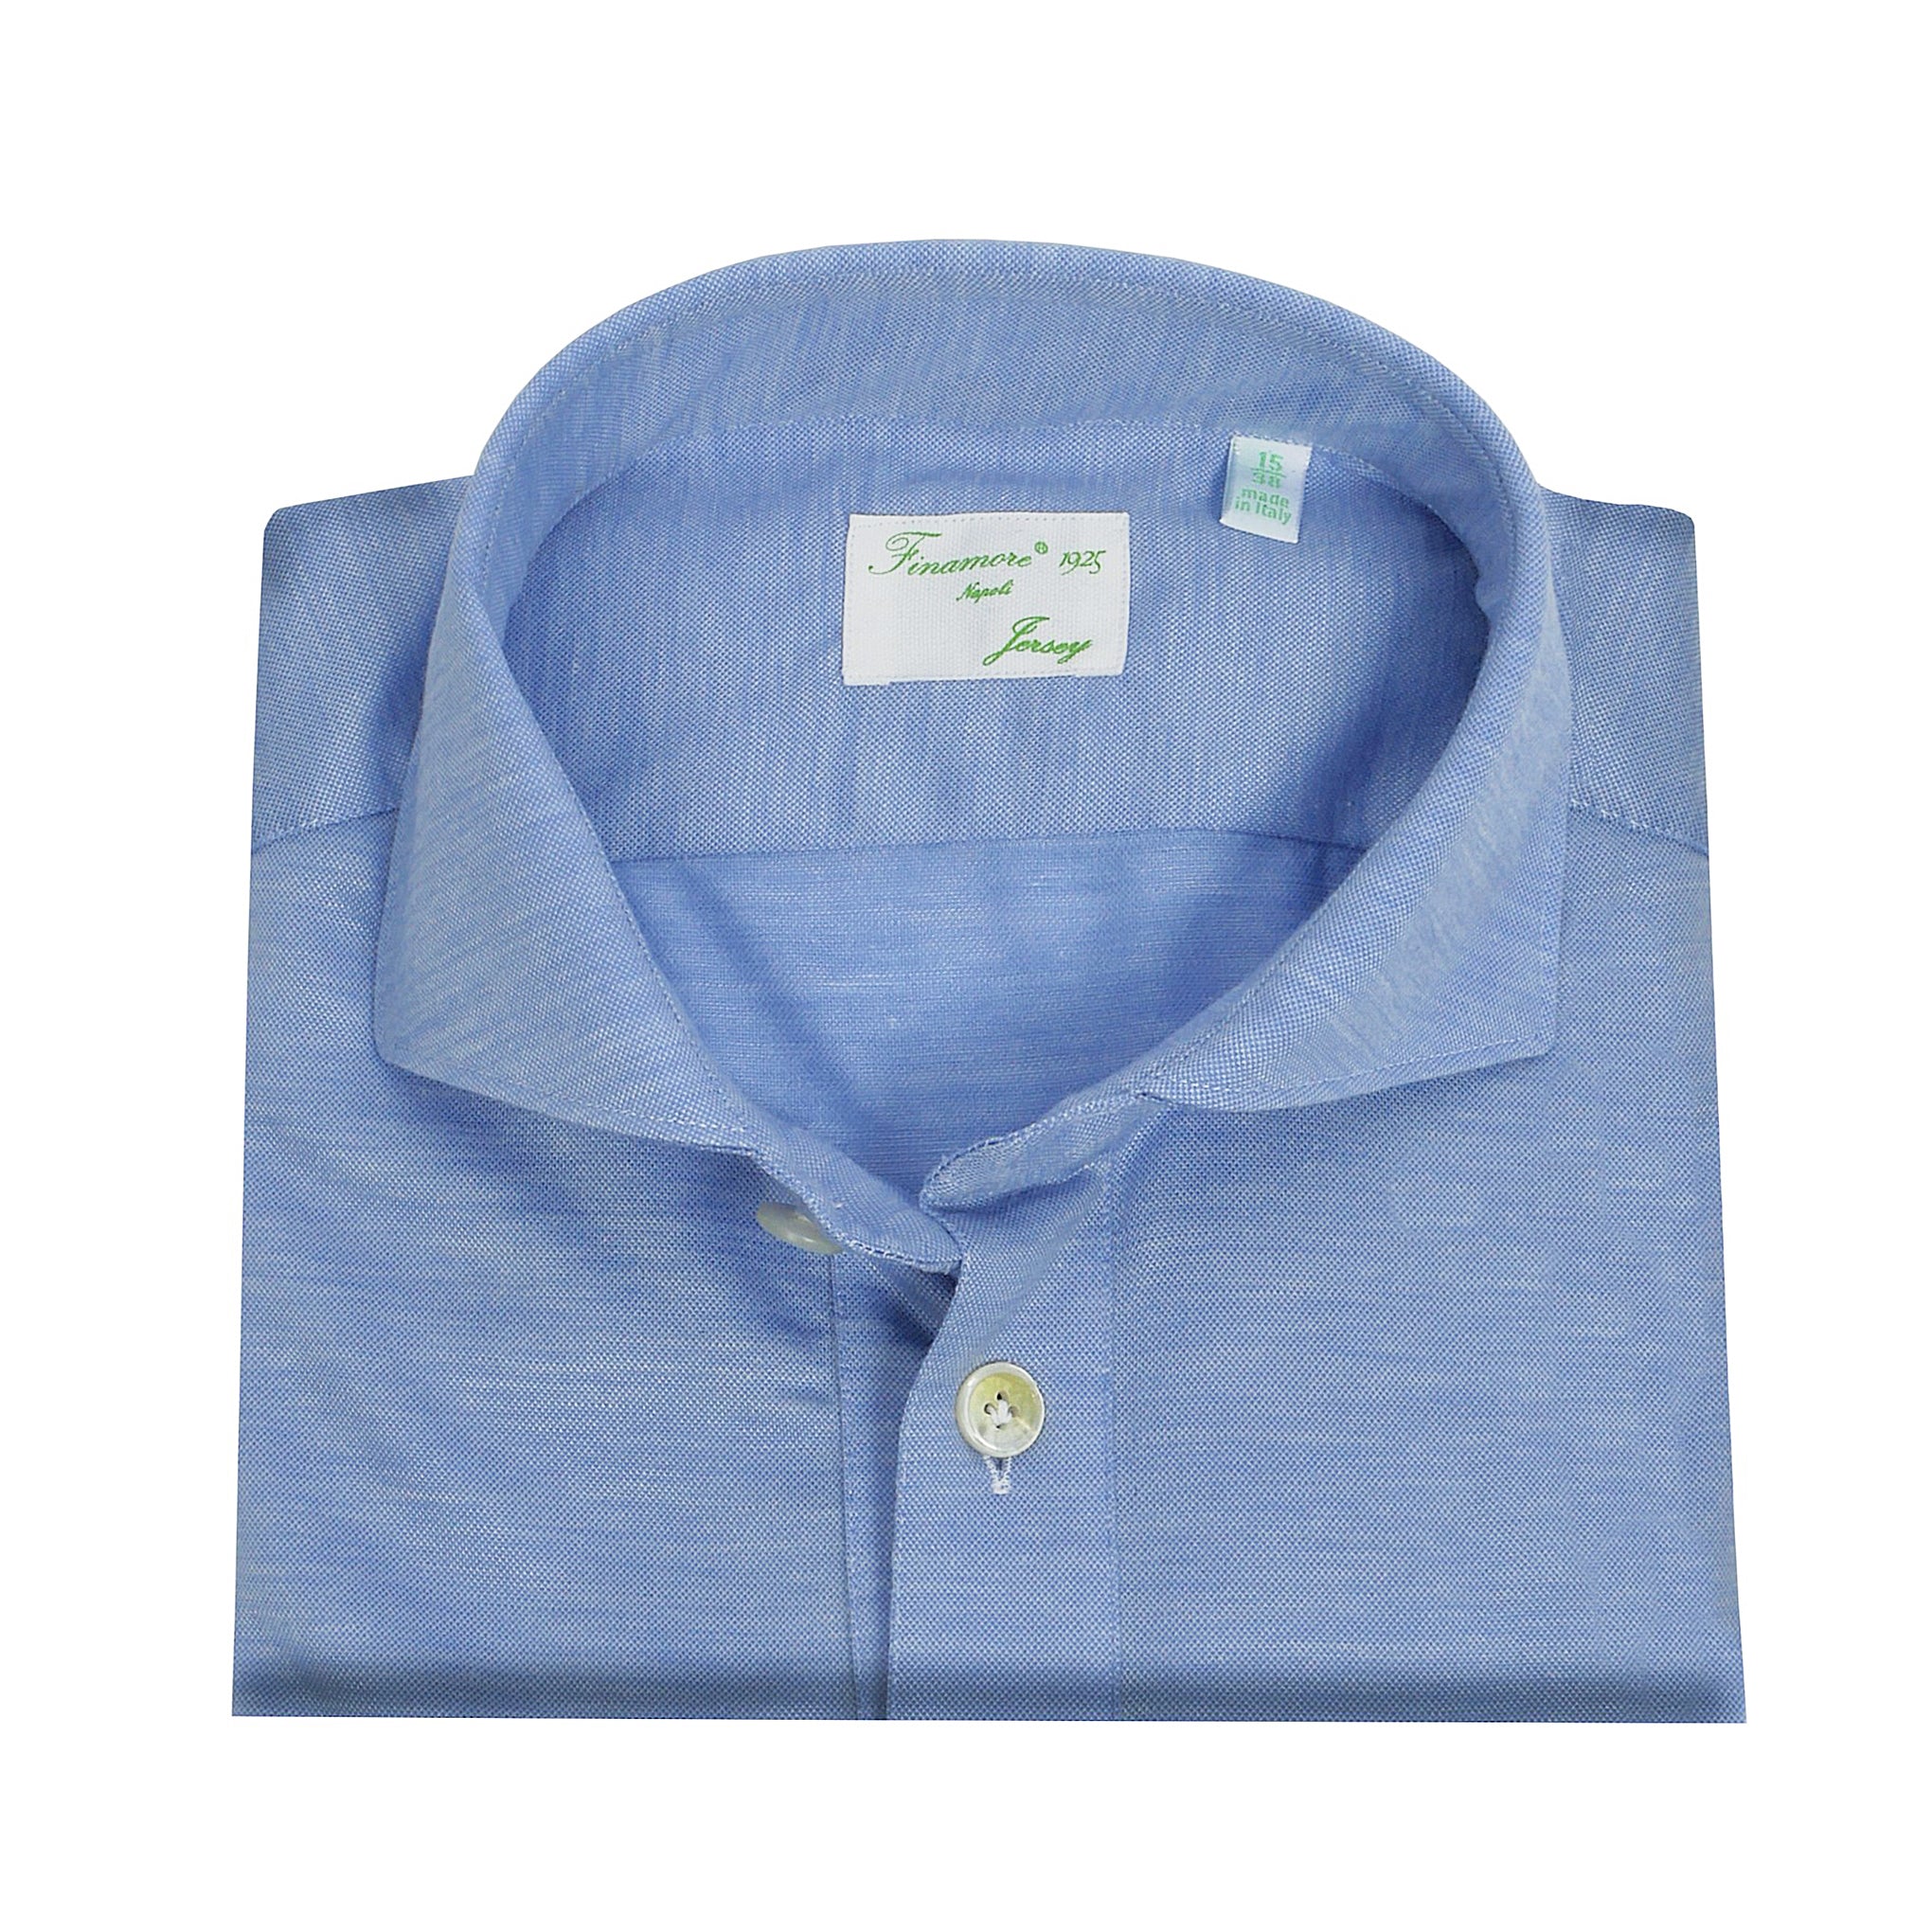 Milton light blue jersey polo shirt in pure virgin wool and cly fluids